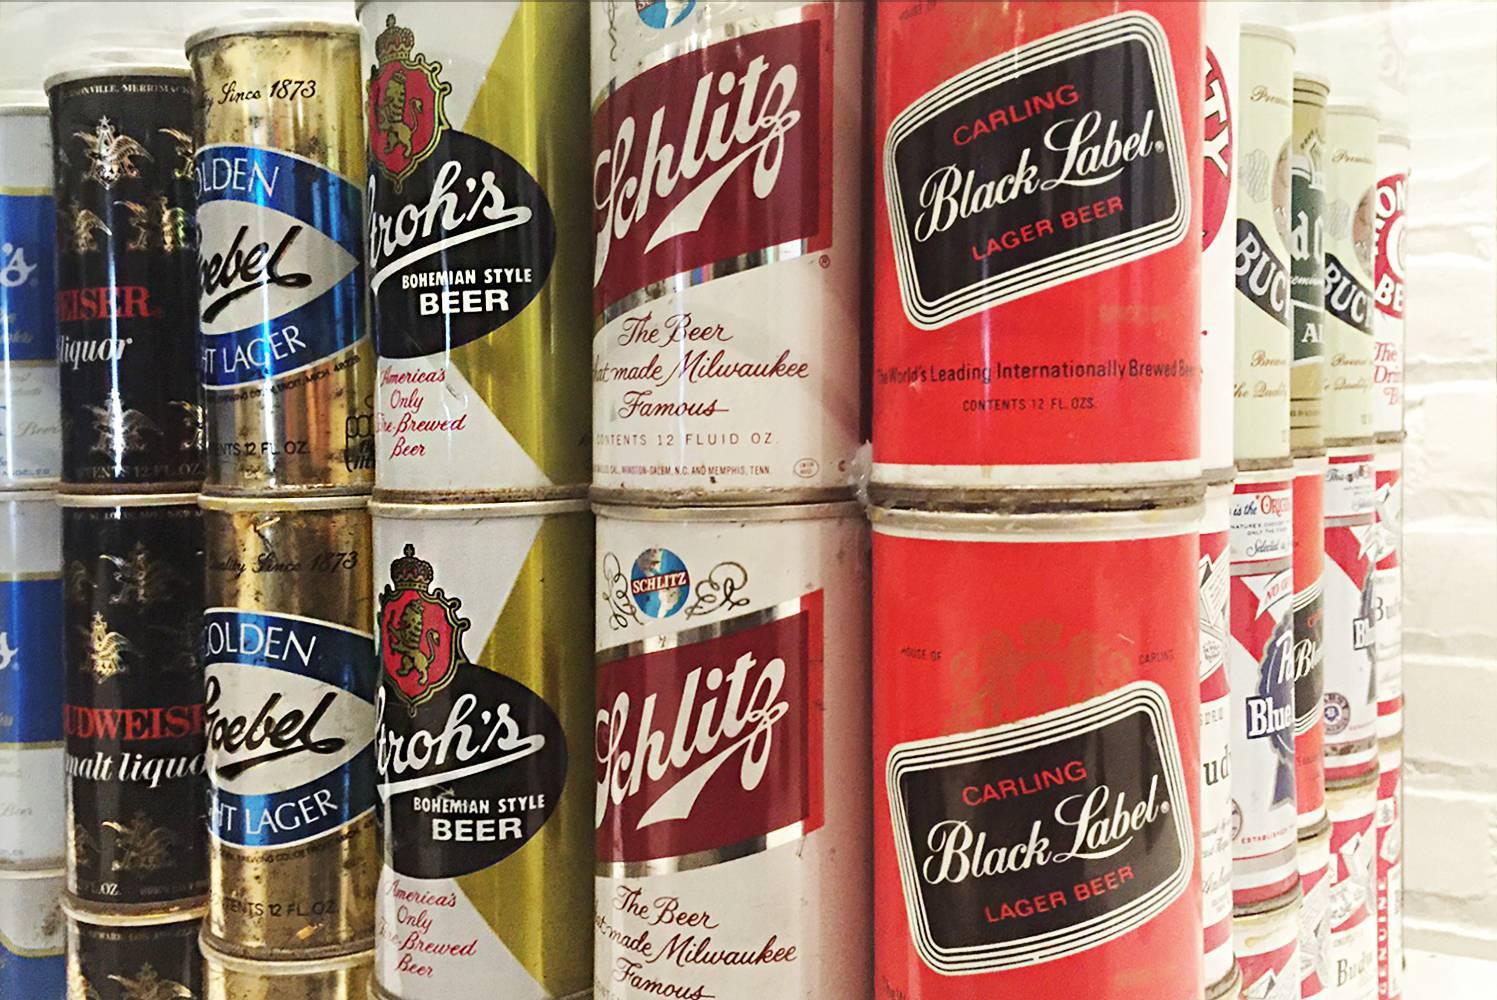 1970s beer cans